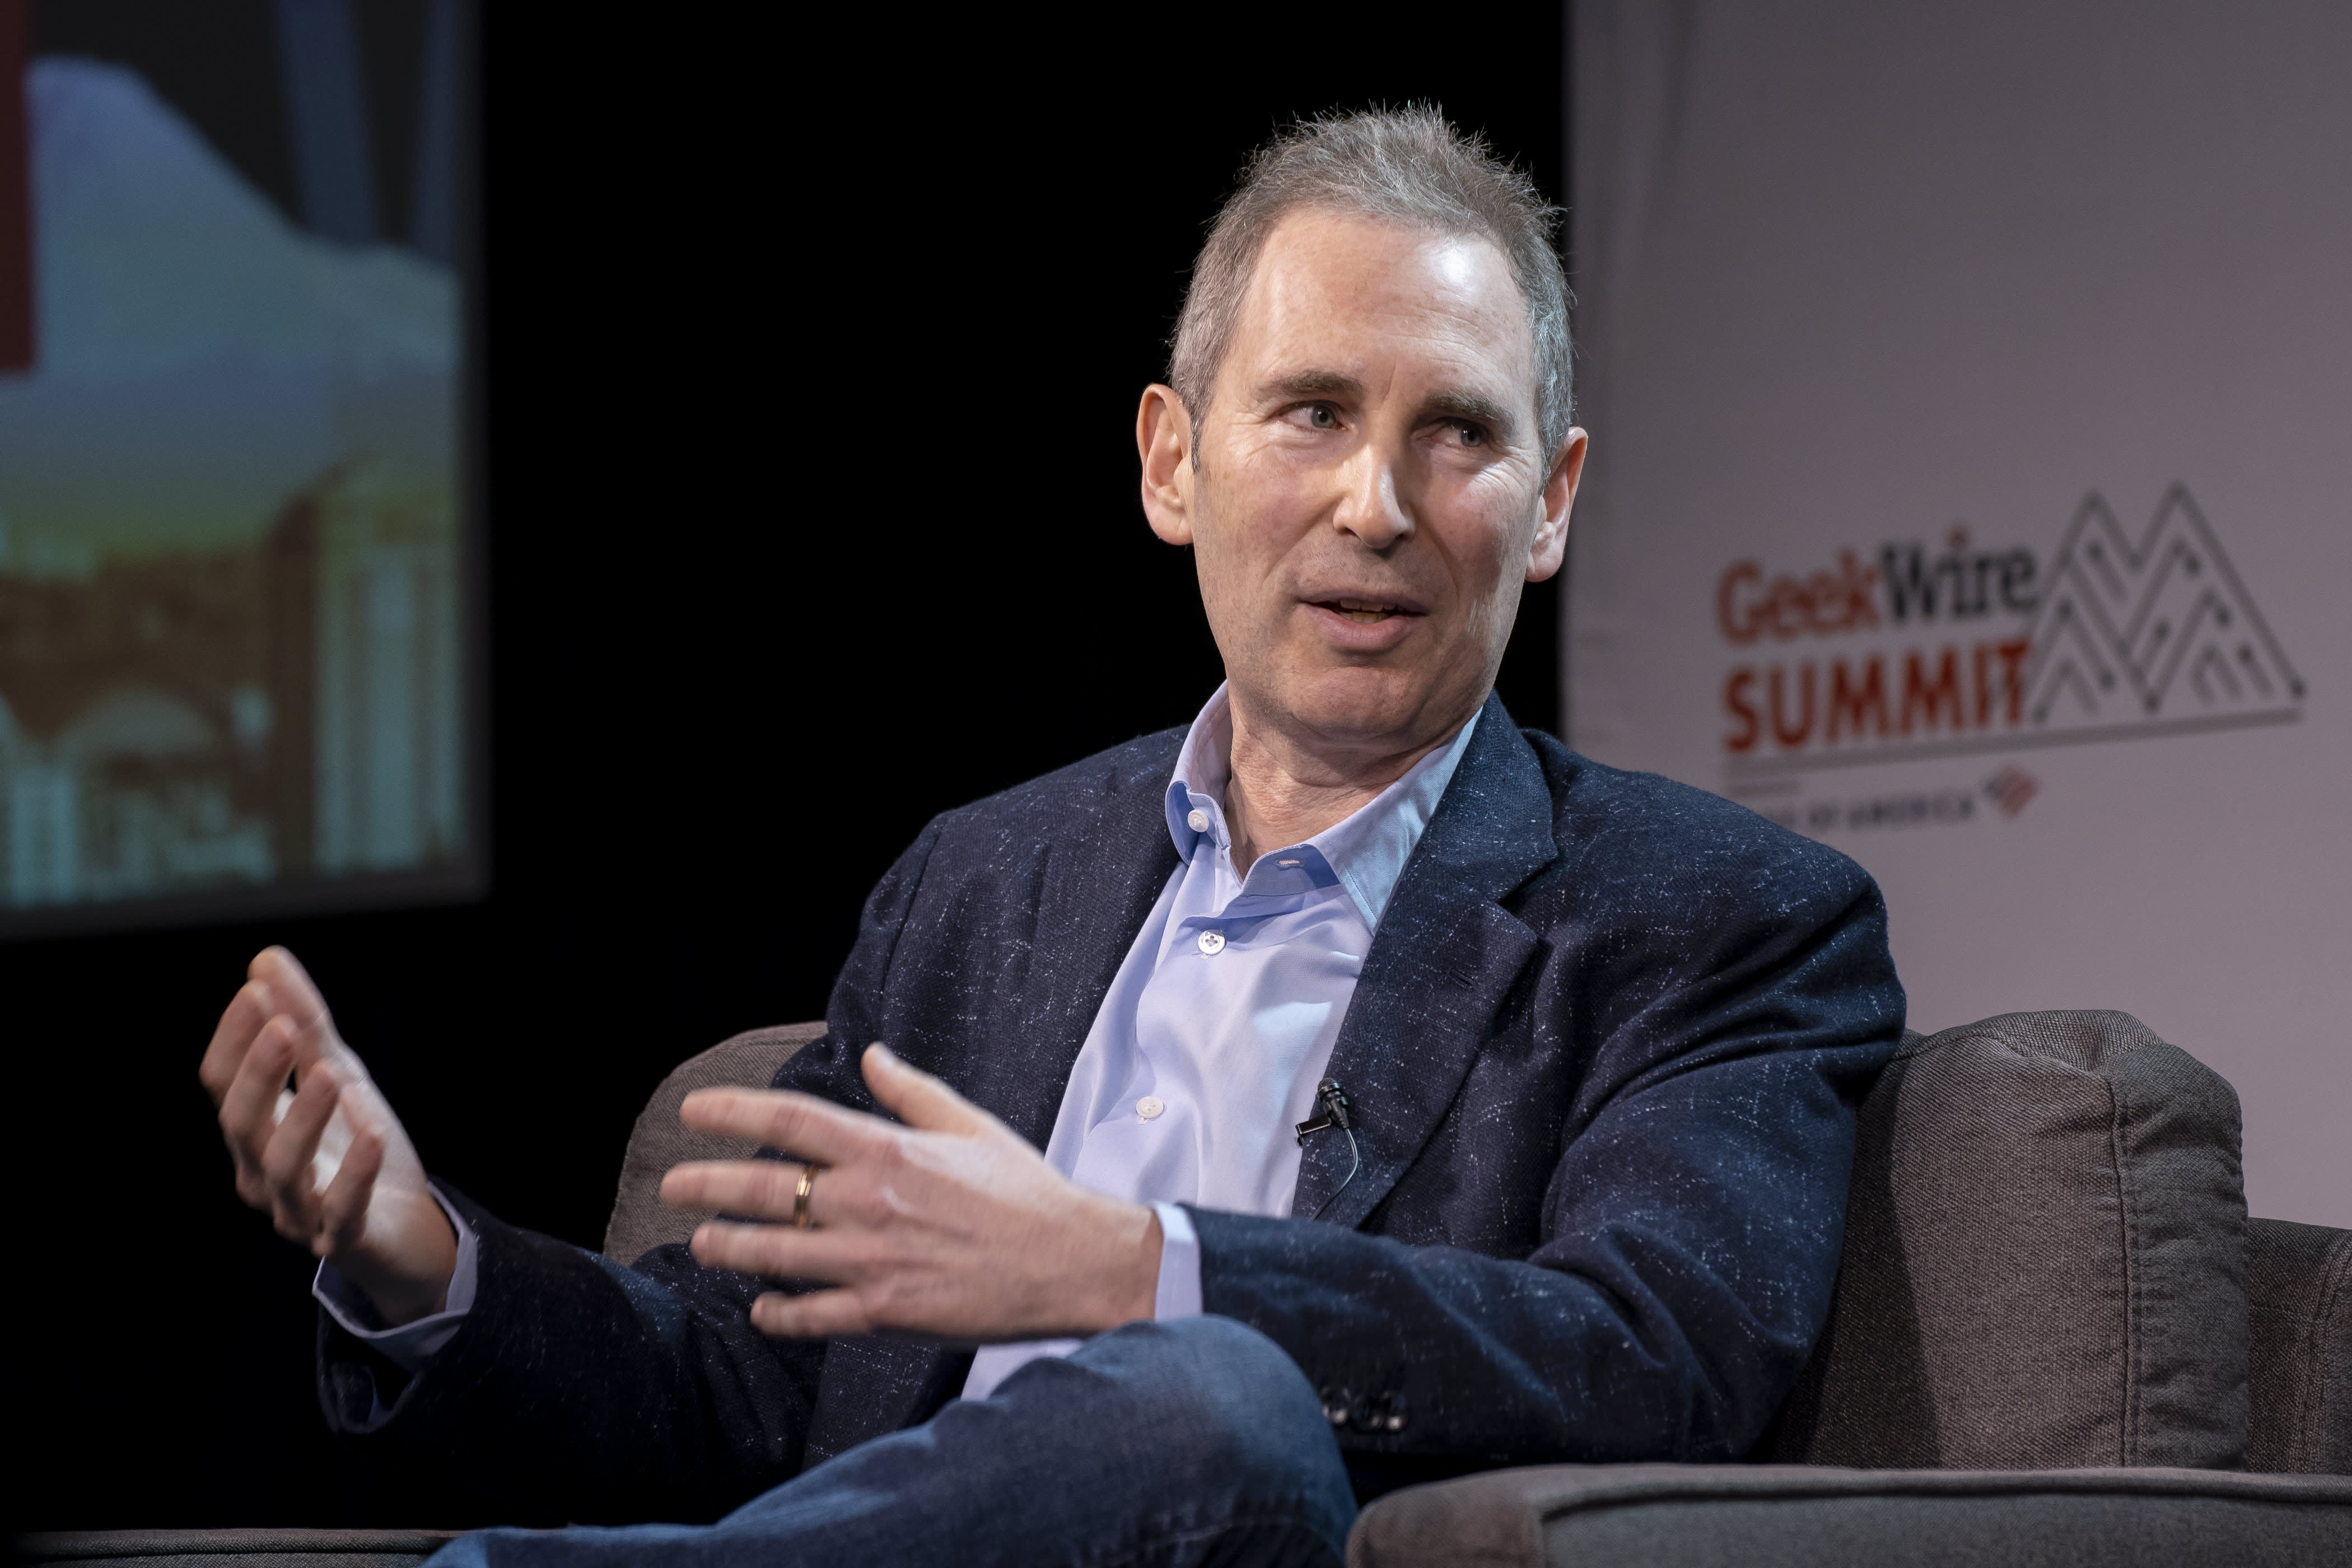 Amazon CEO Andy Jassy needs to take a page out of Mark Zuckerberg's cost-cutting playbook at Meta